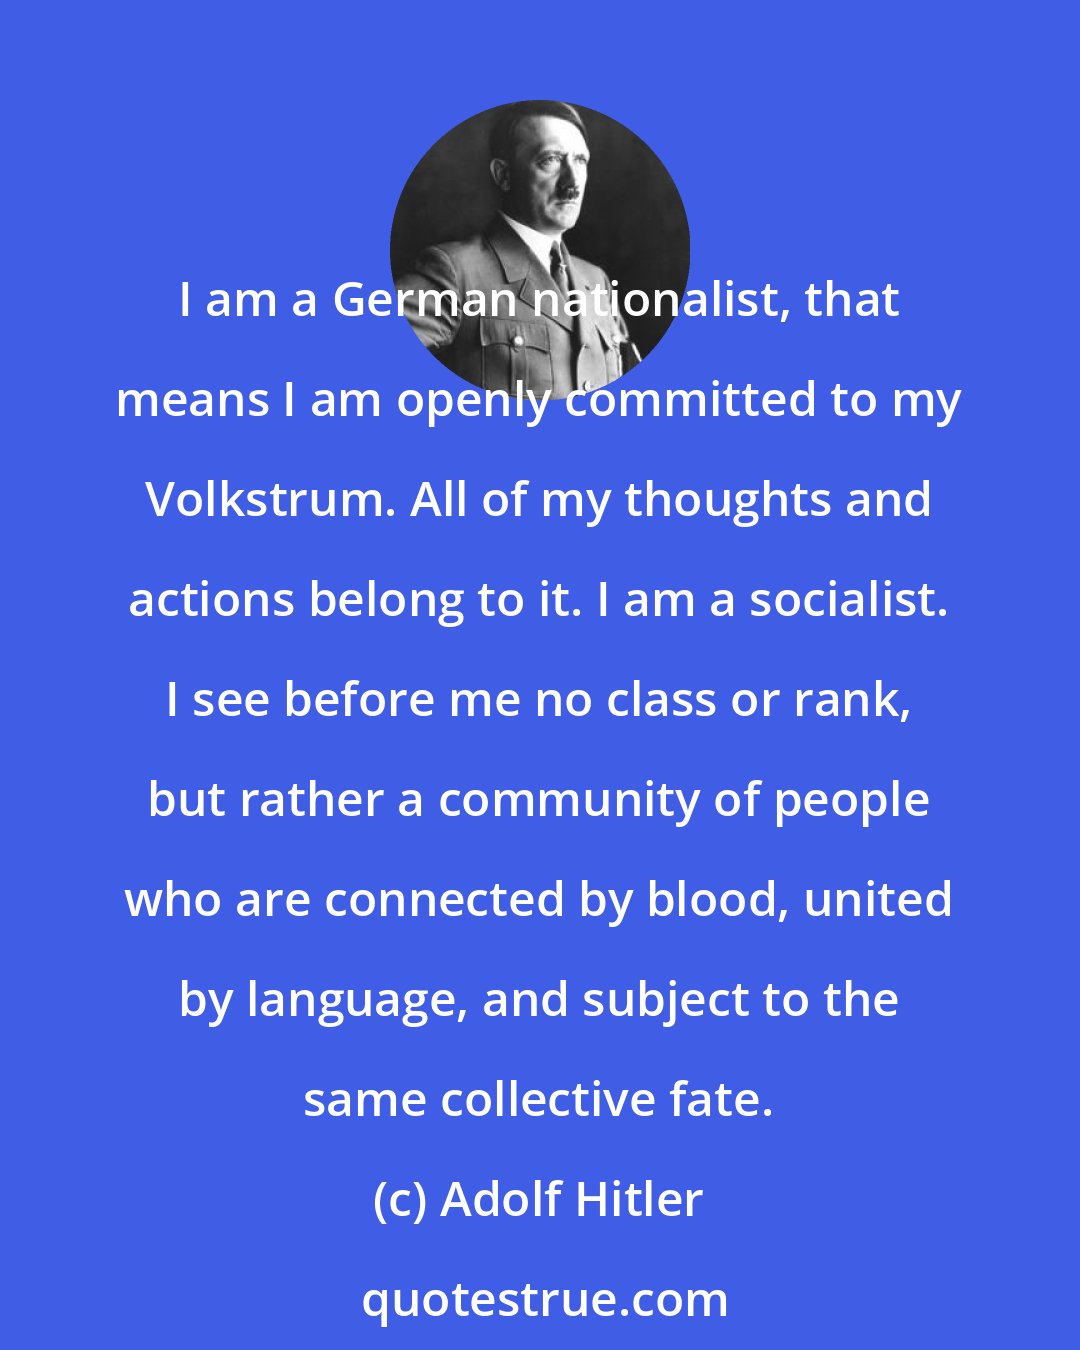 Adolf Hitler: I am a German nationalist, that means I am openly committed to my Volkstrum. All of my thoughts and actions belong to it. I am a socialist. I see before me no class or rank, but rather a community of people who are connected by blood, united by language, and subject to the same collective fate.